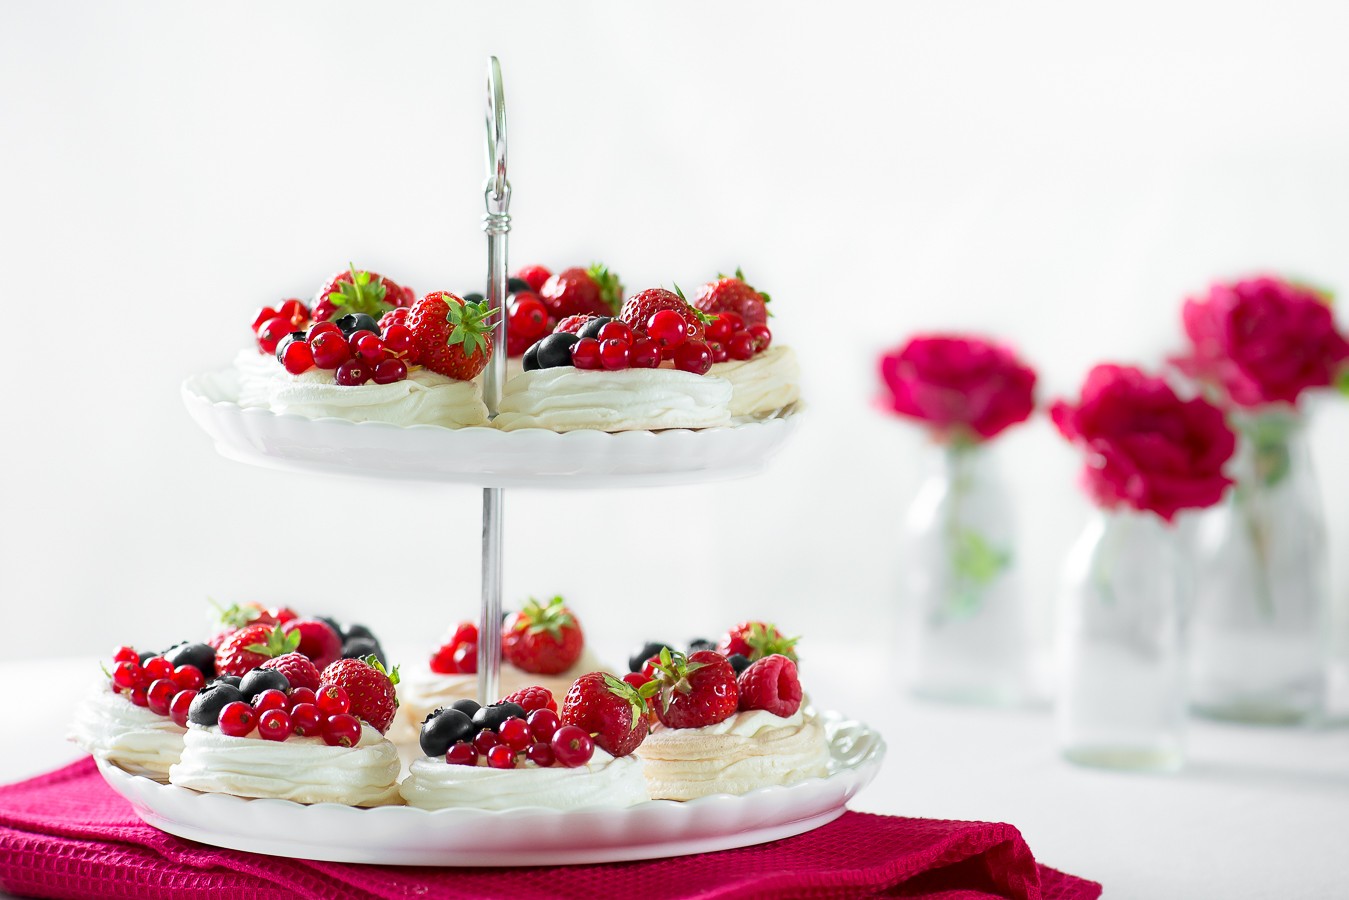 Meringue Nests with Fresh Berries and Cream - The Sweet Rebellion